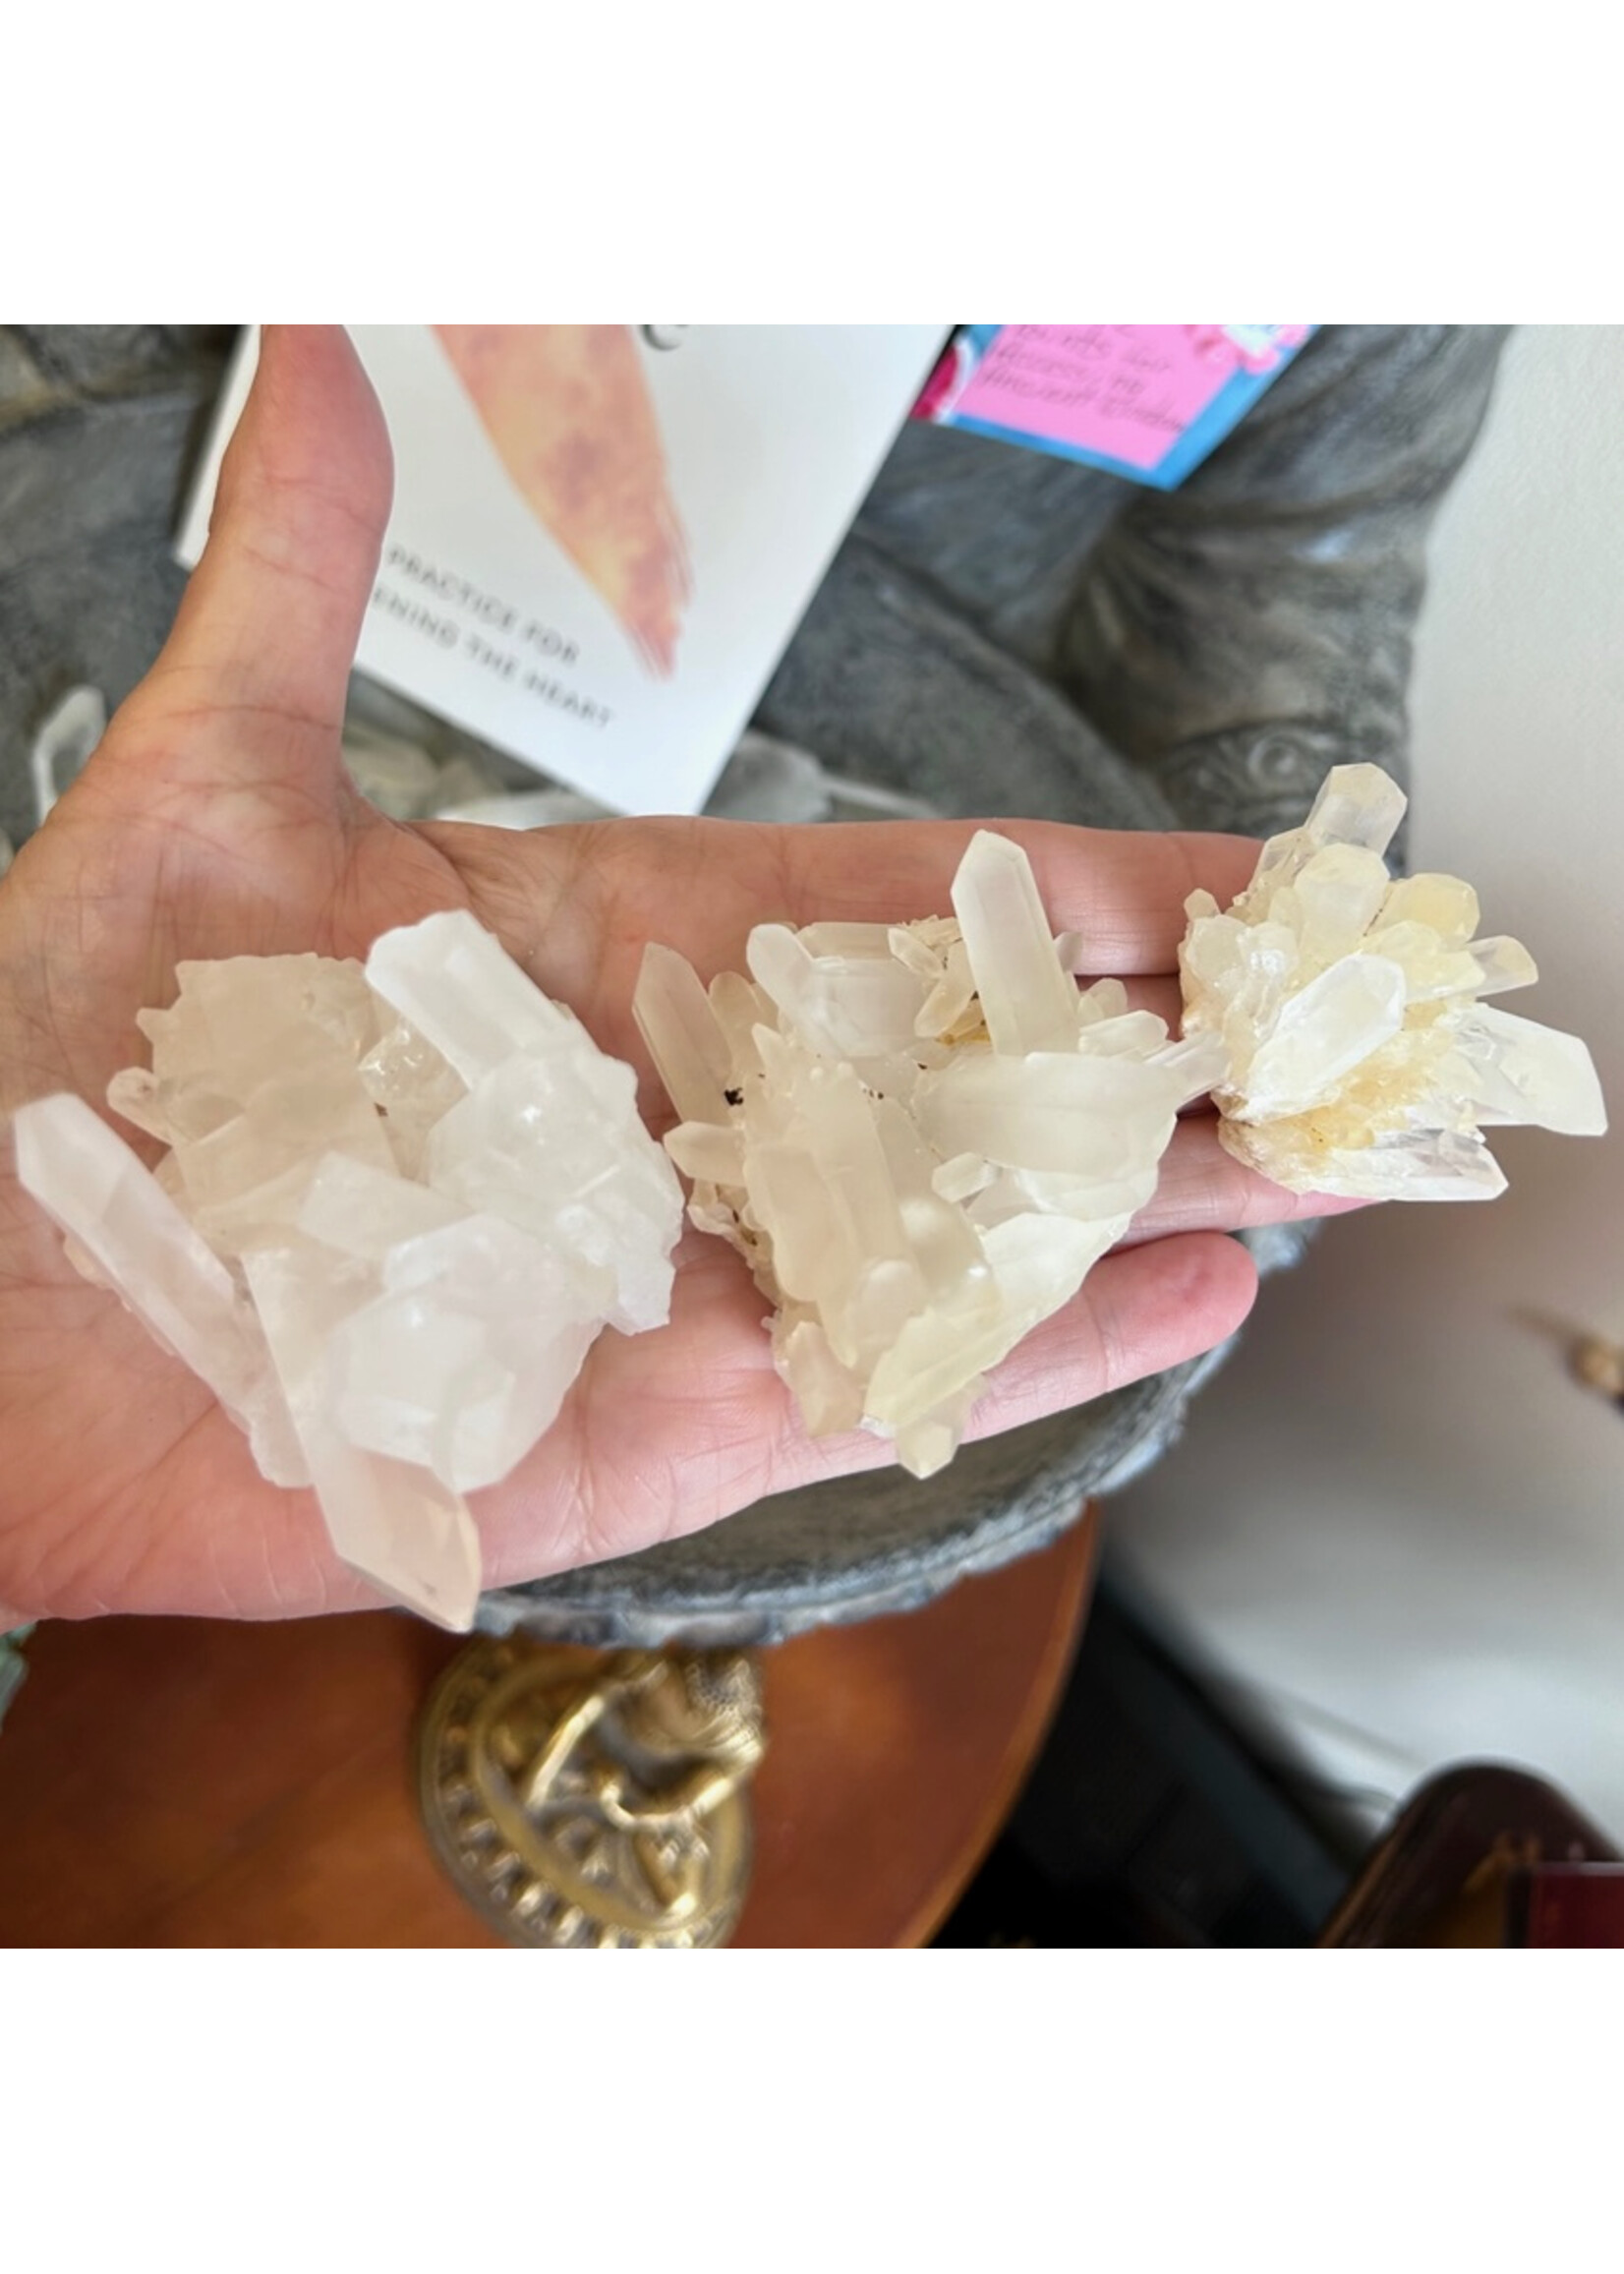 Quartz Clusters for healing at an energetic level